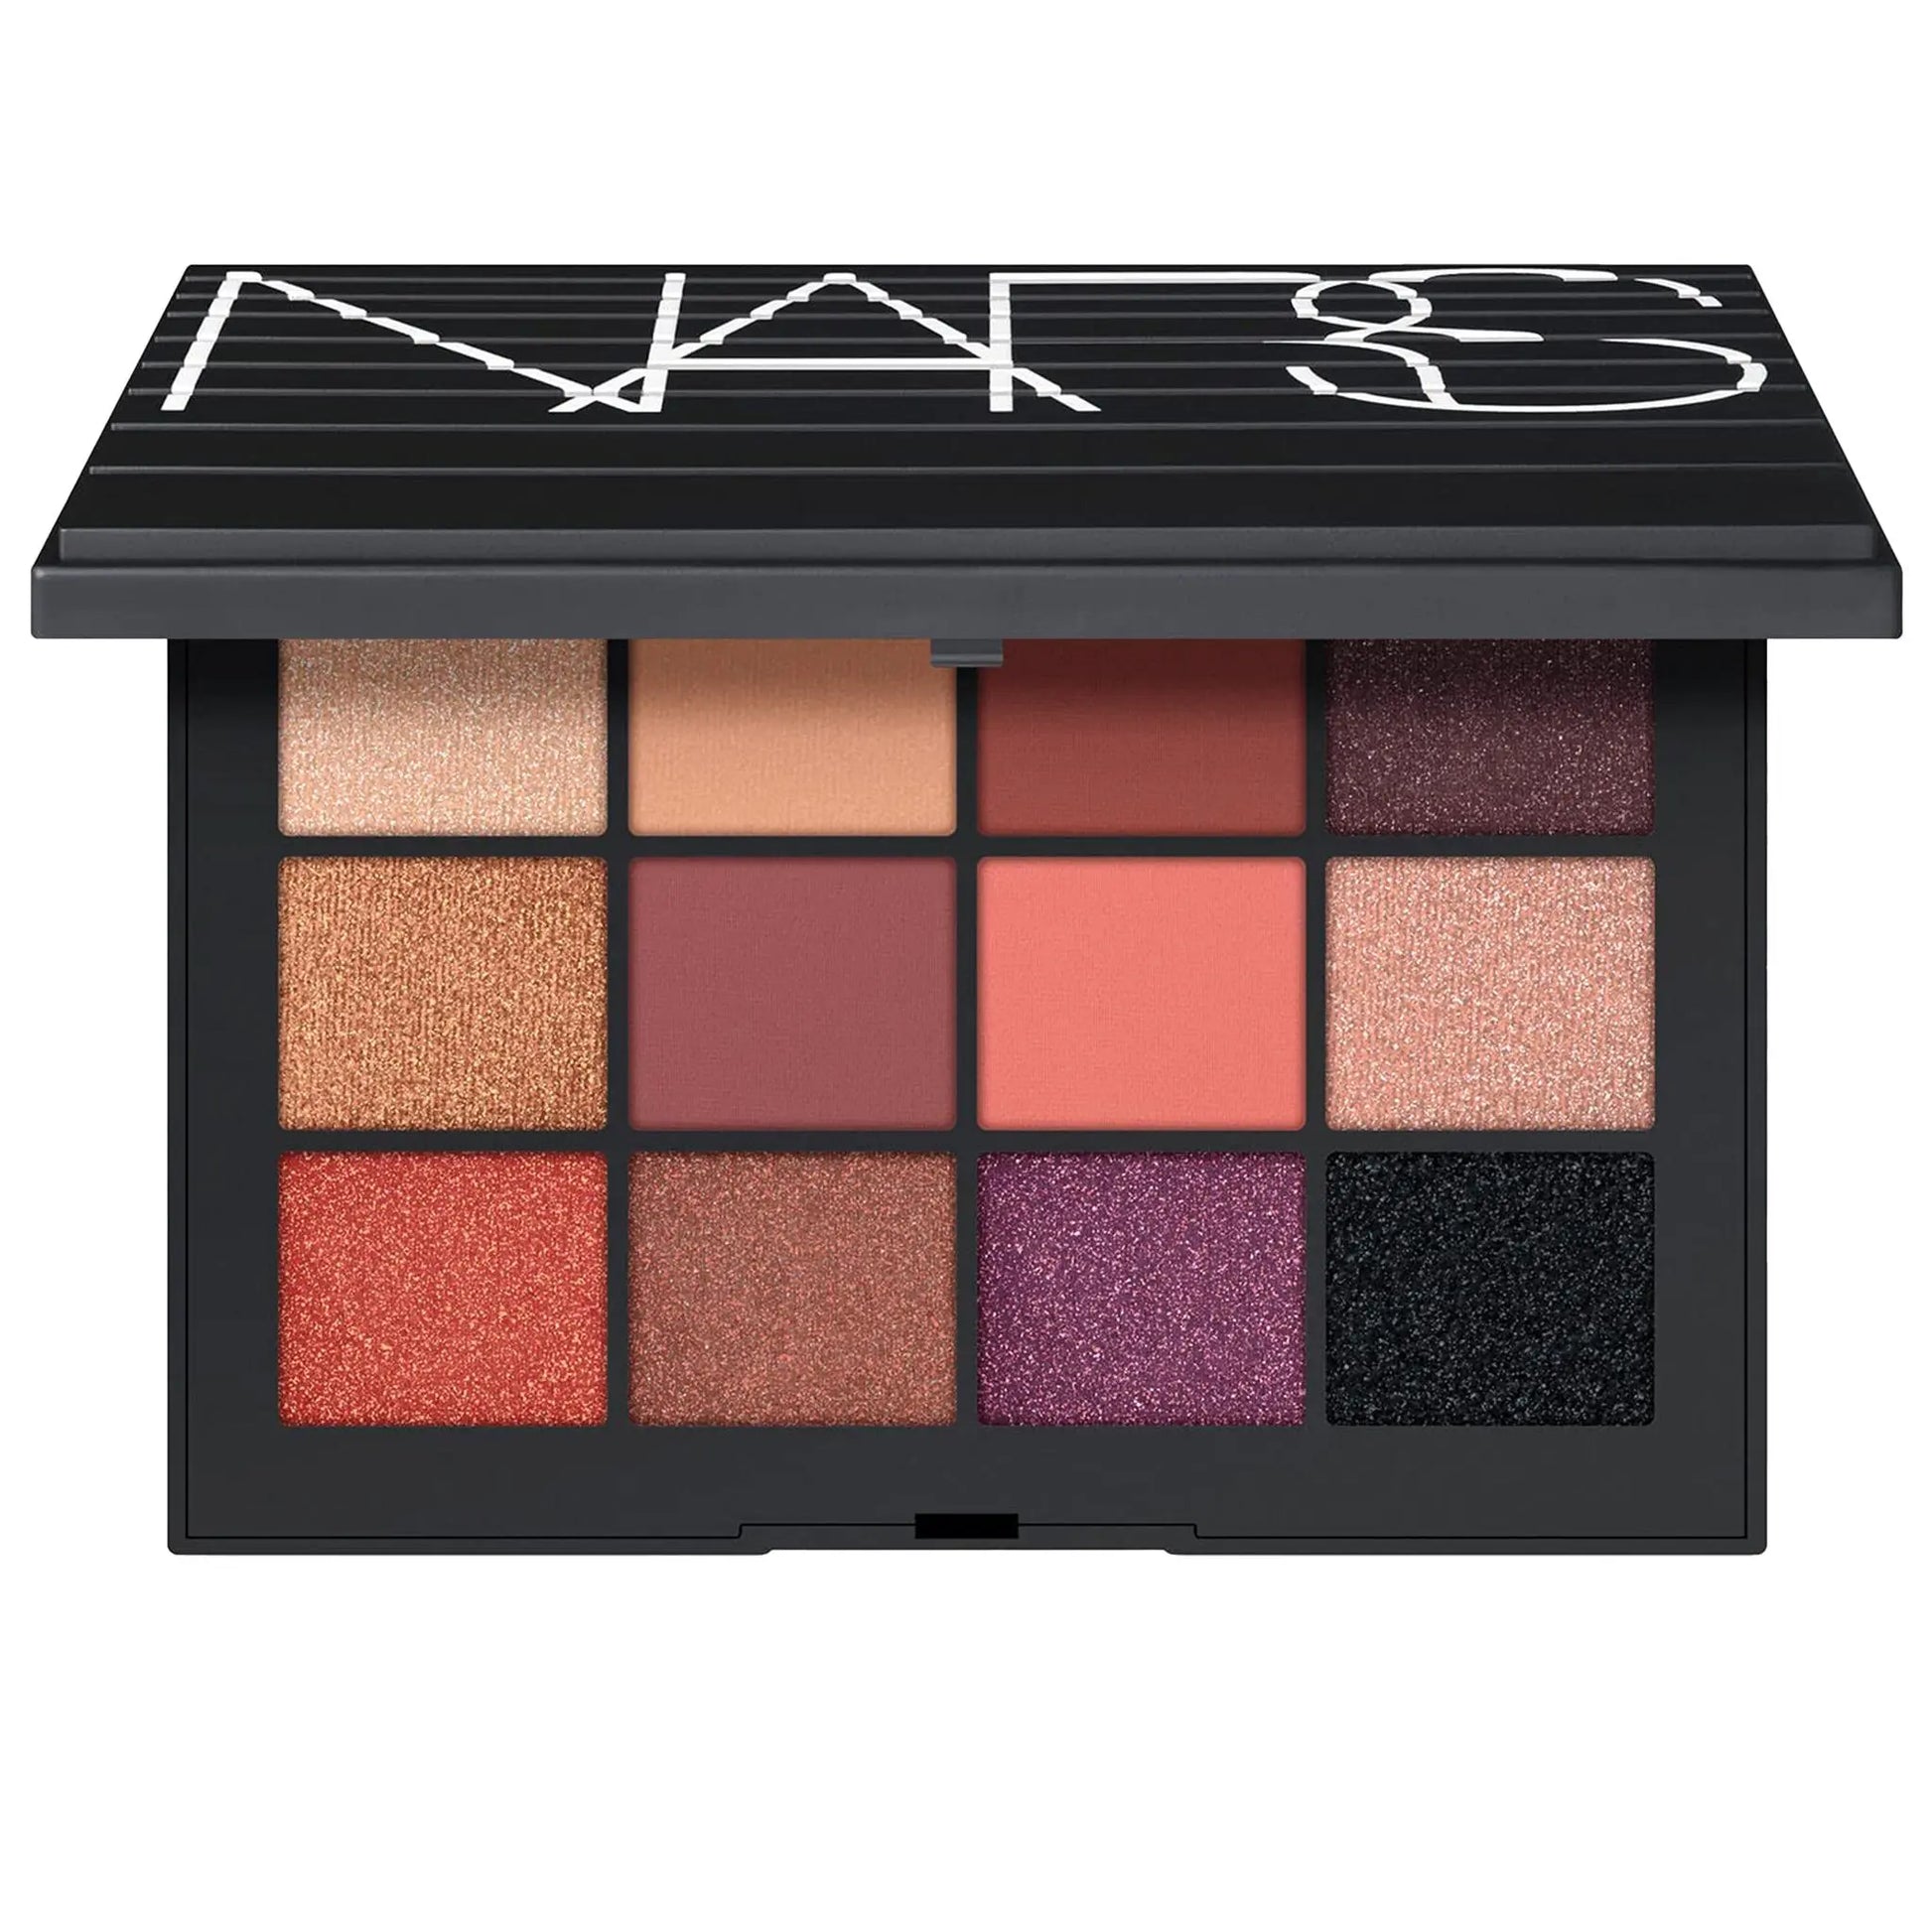 NARS PALETTE EXTREME EFFECTS EYESHADOW PALETTE Nars